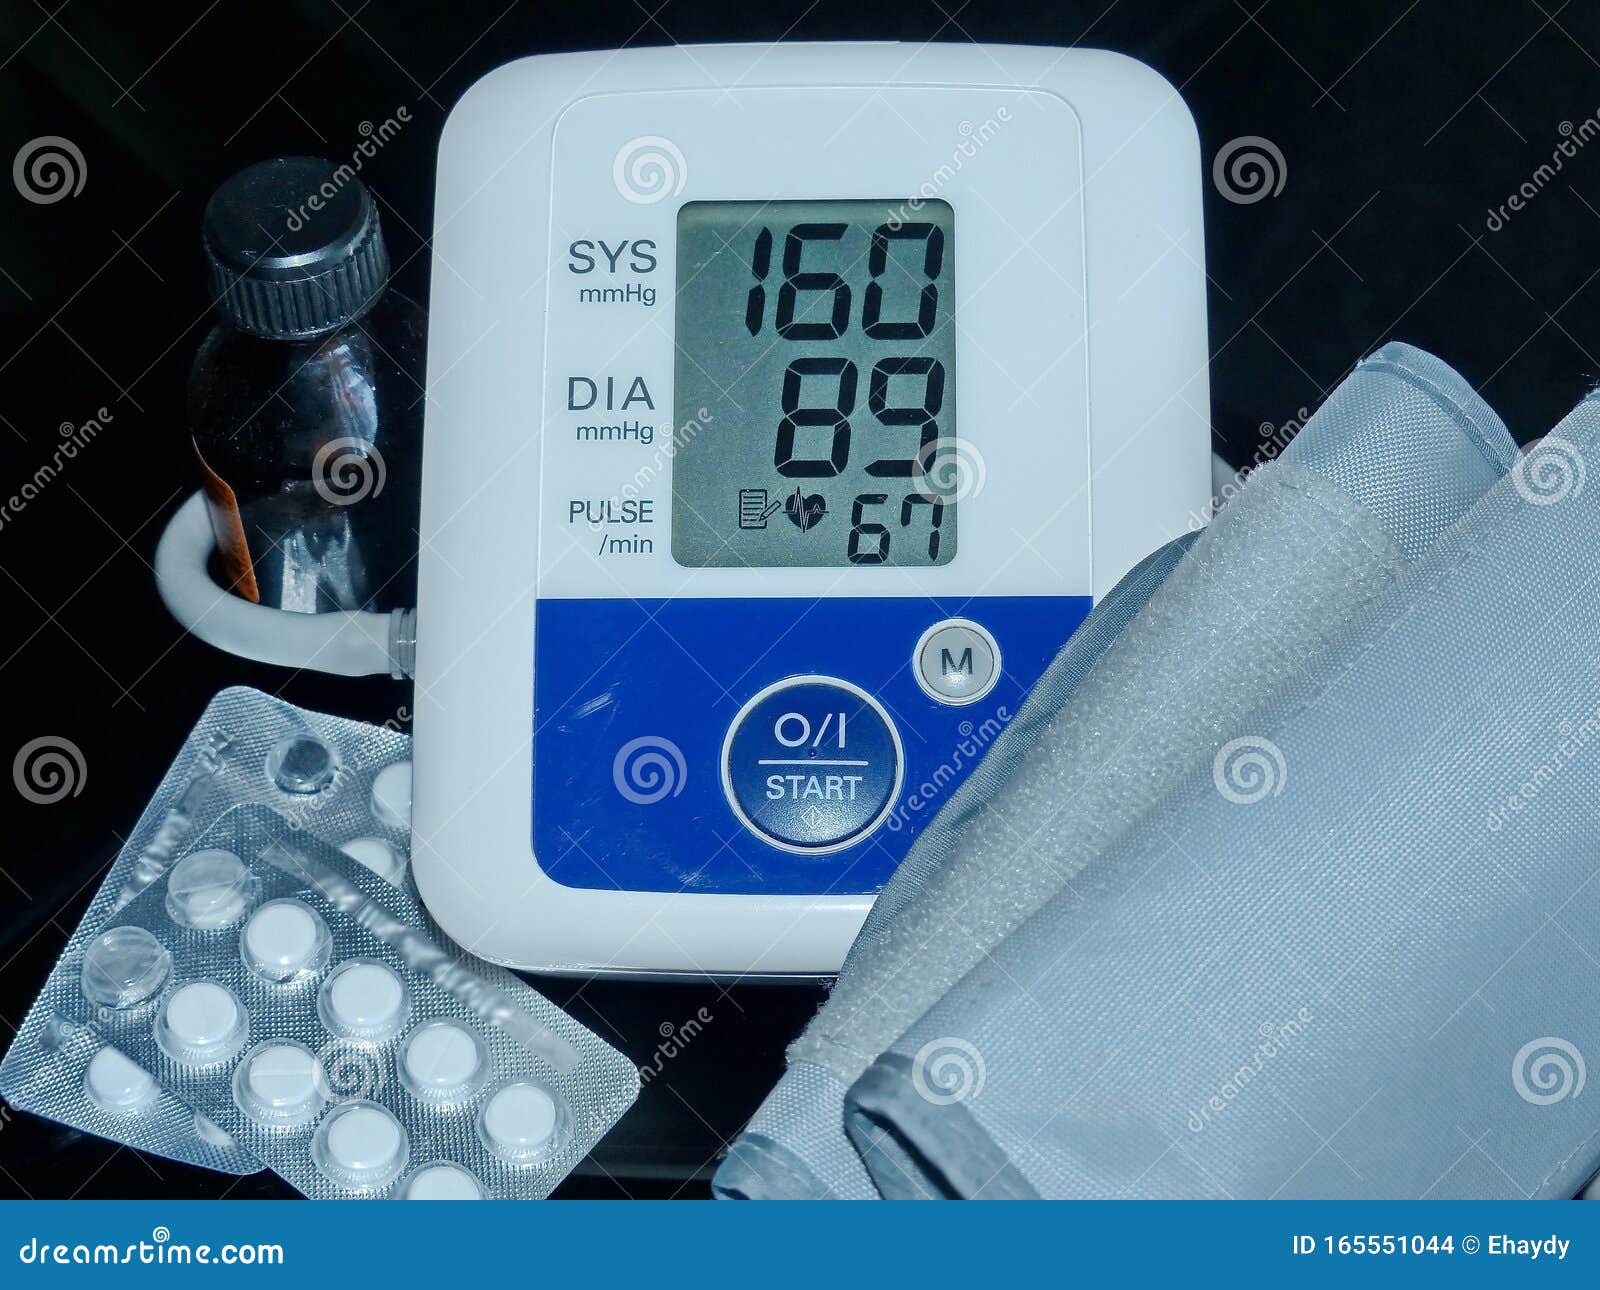 Apparatus for Measuring Blood Pressure. High Pressure. Data Shows